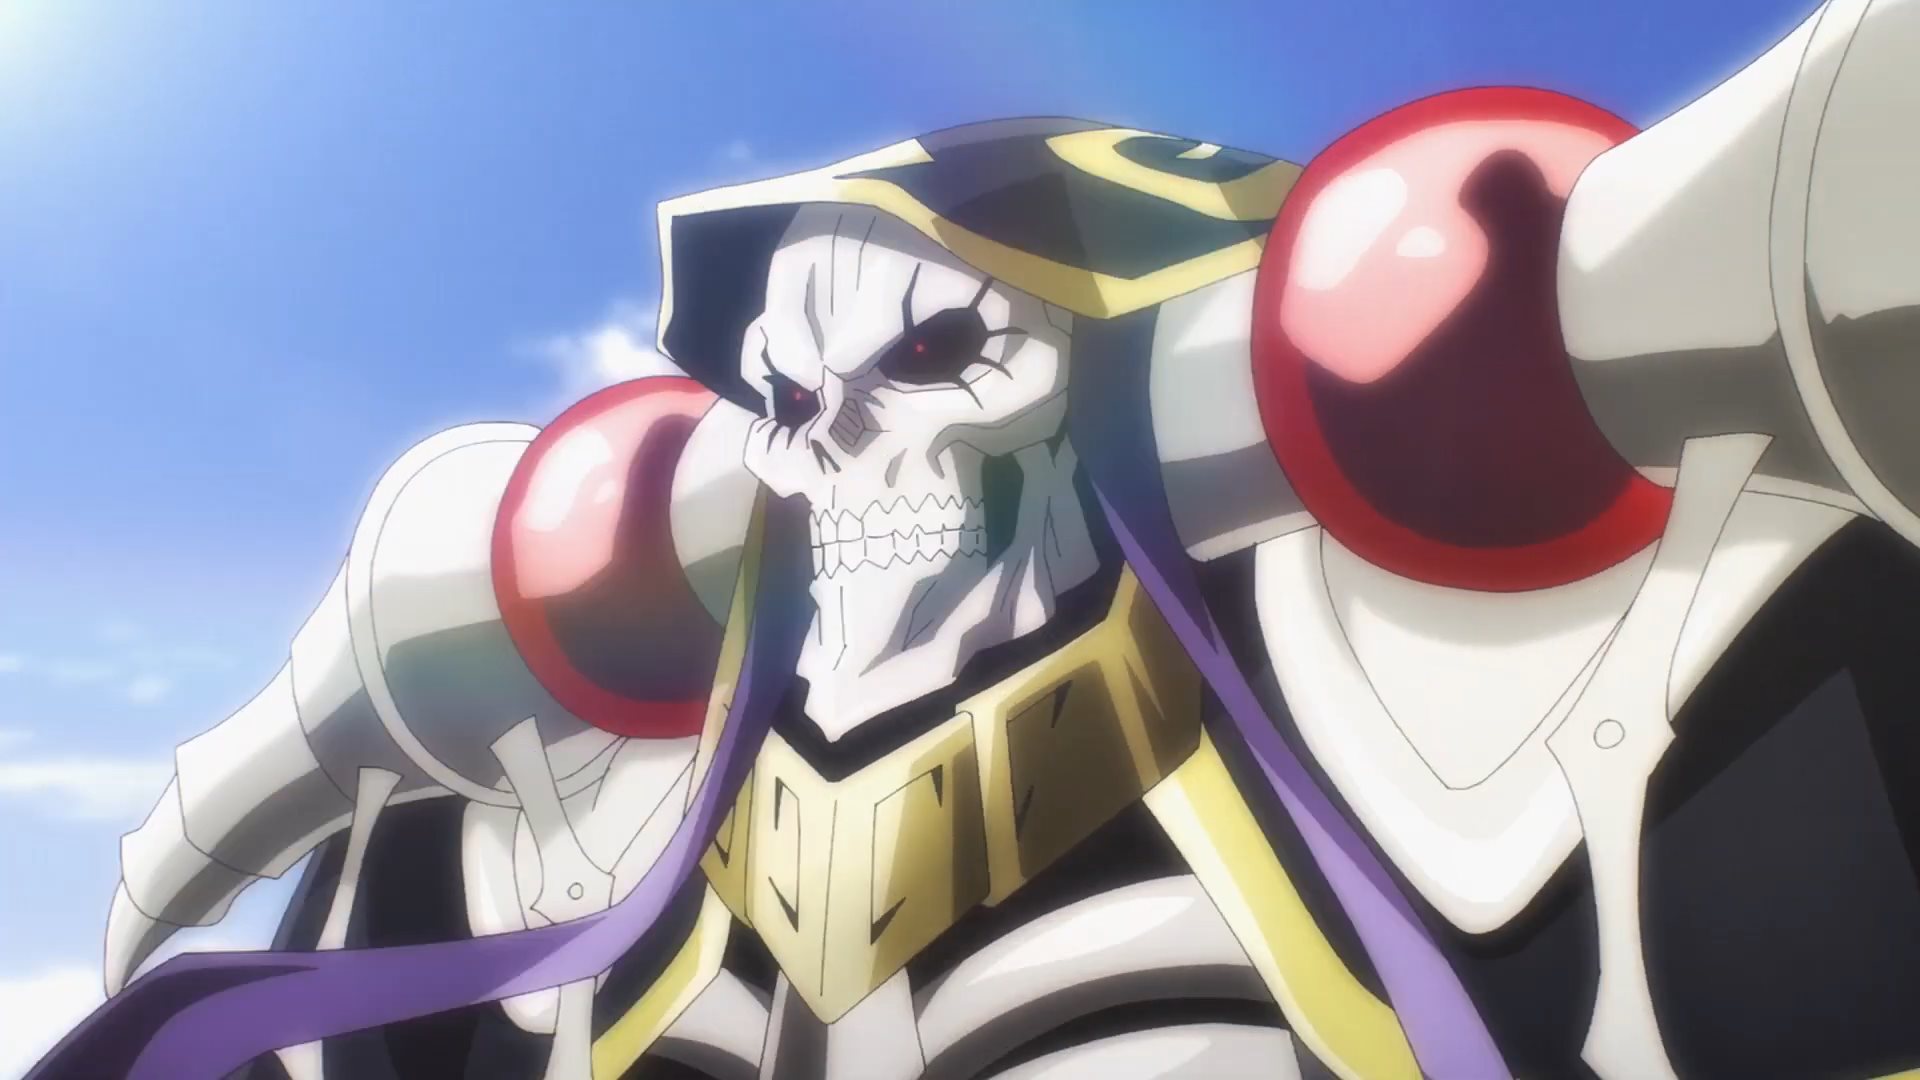 How Does Overlord End? (Anime & Manga)